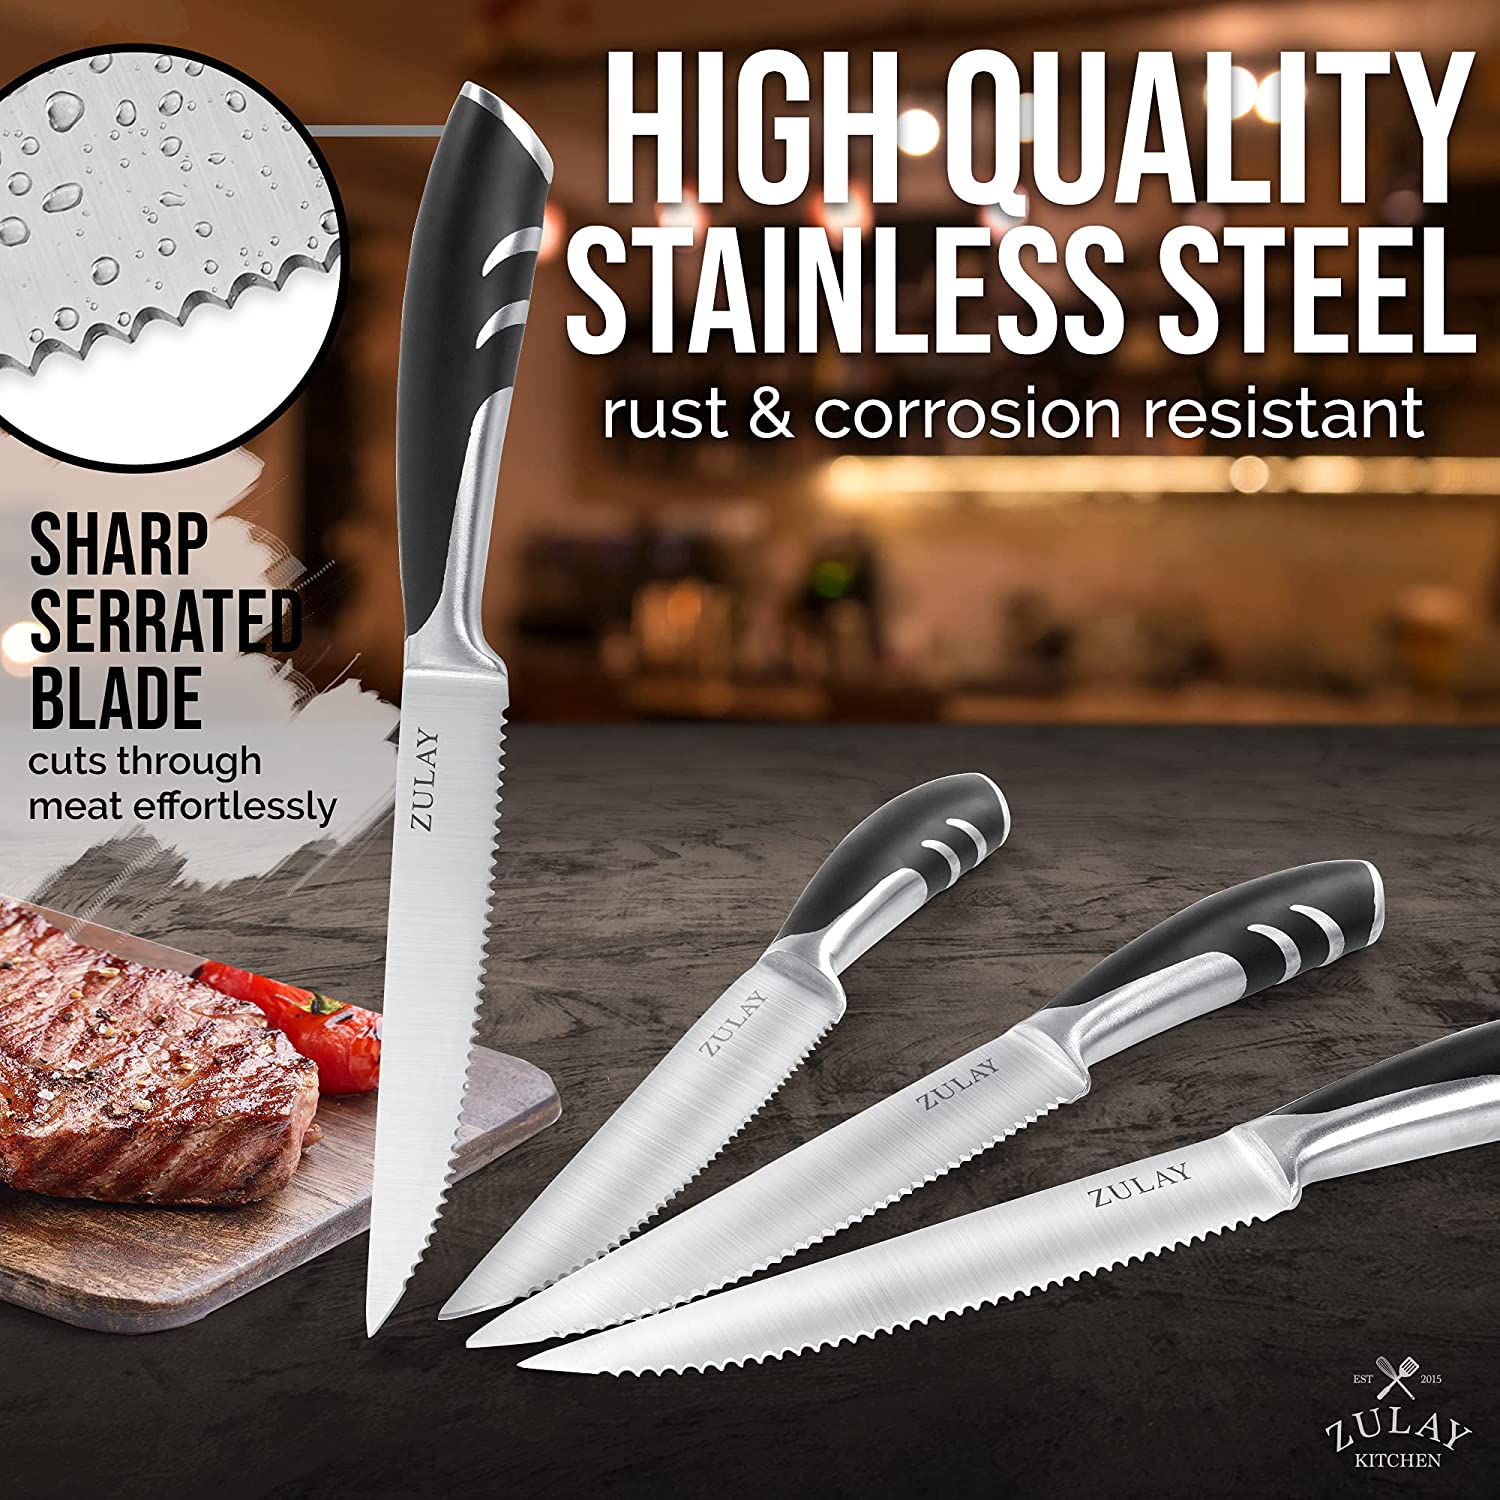 https://cdn.shopify.com/s/files/1/0091/0593/2324/products/steak-knives-set-of-4-5-inch-full-tang-serrated-stainless-steel-steak-knife-set-with-comfortable-non-slip-handlesteak-knives-set-of-4-5-inch-full-tang-serrated--405294.jpg?v=1684848753&width=1500